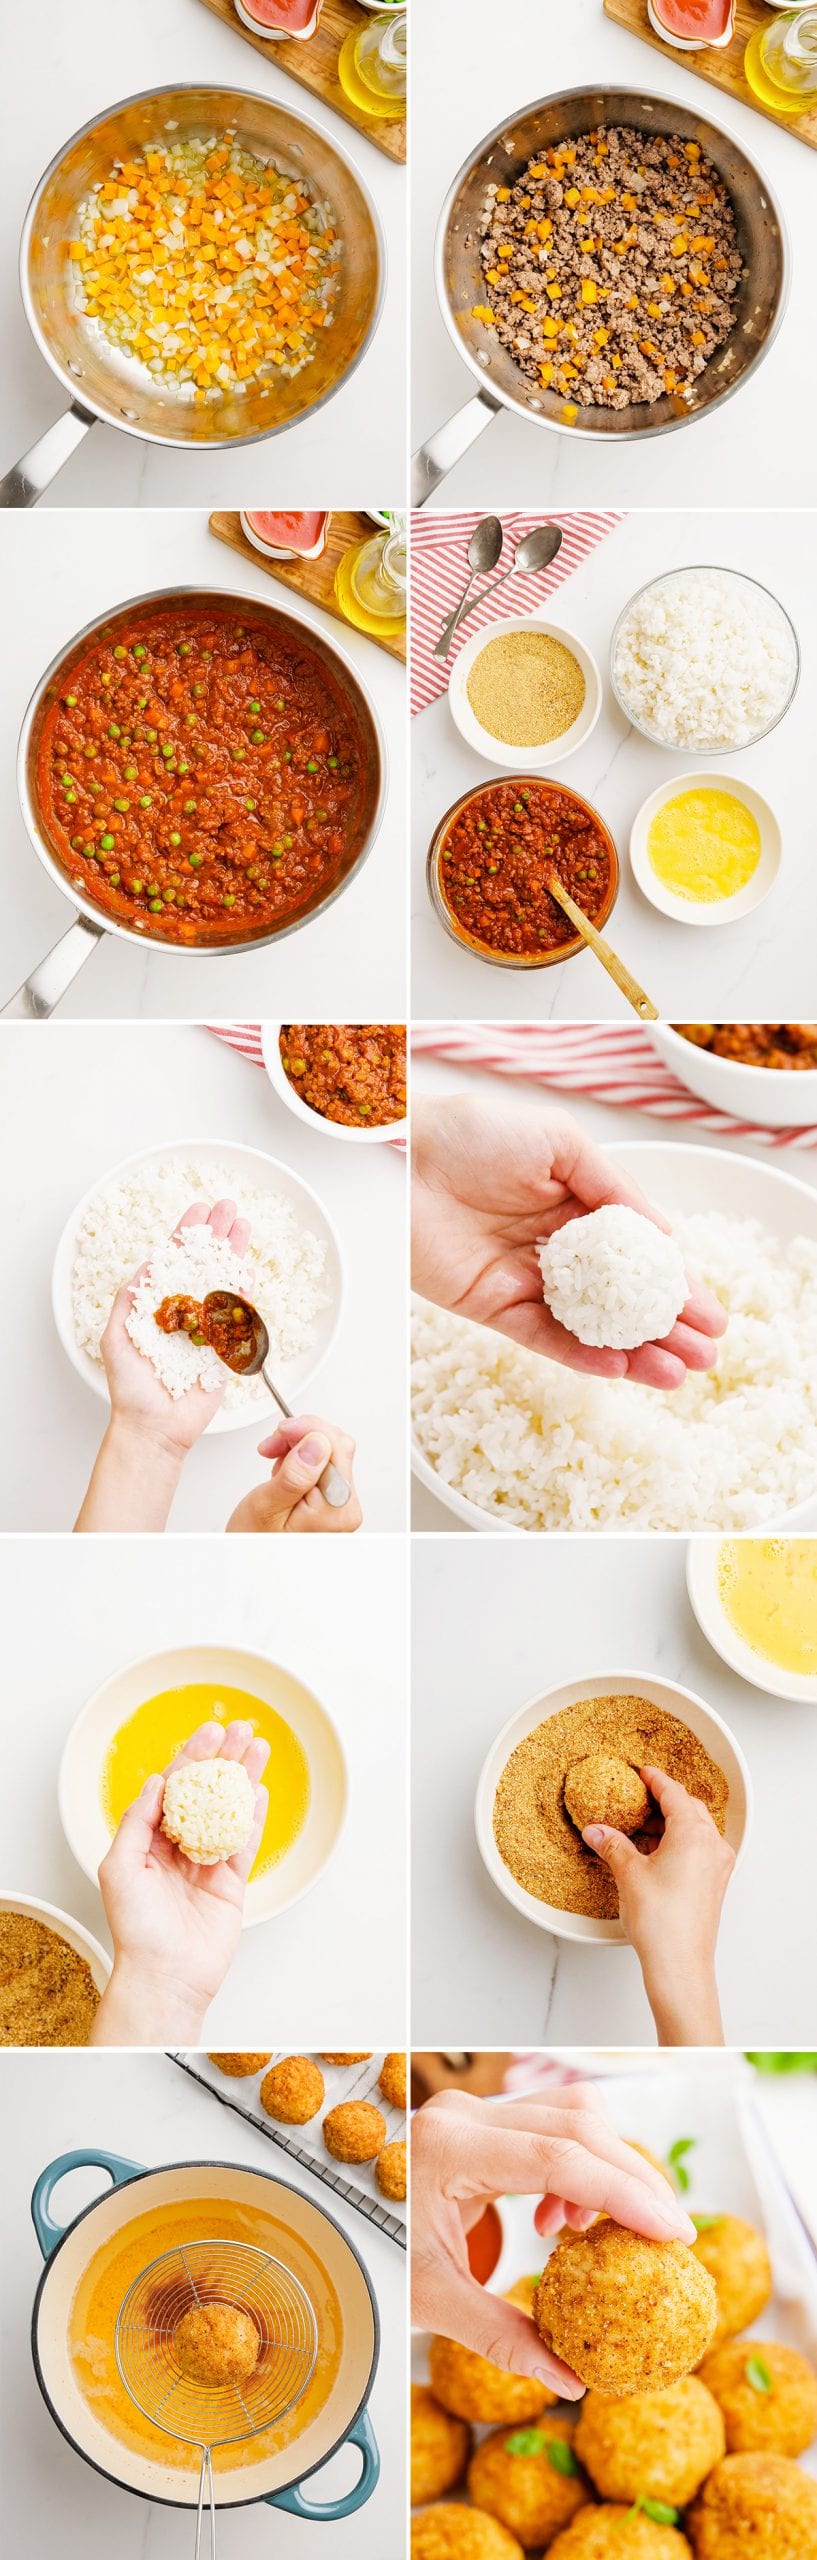 A collage of 10 step by step photos showing how to make arancini.